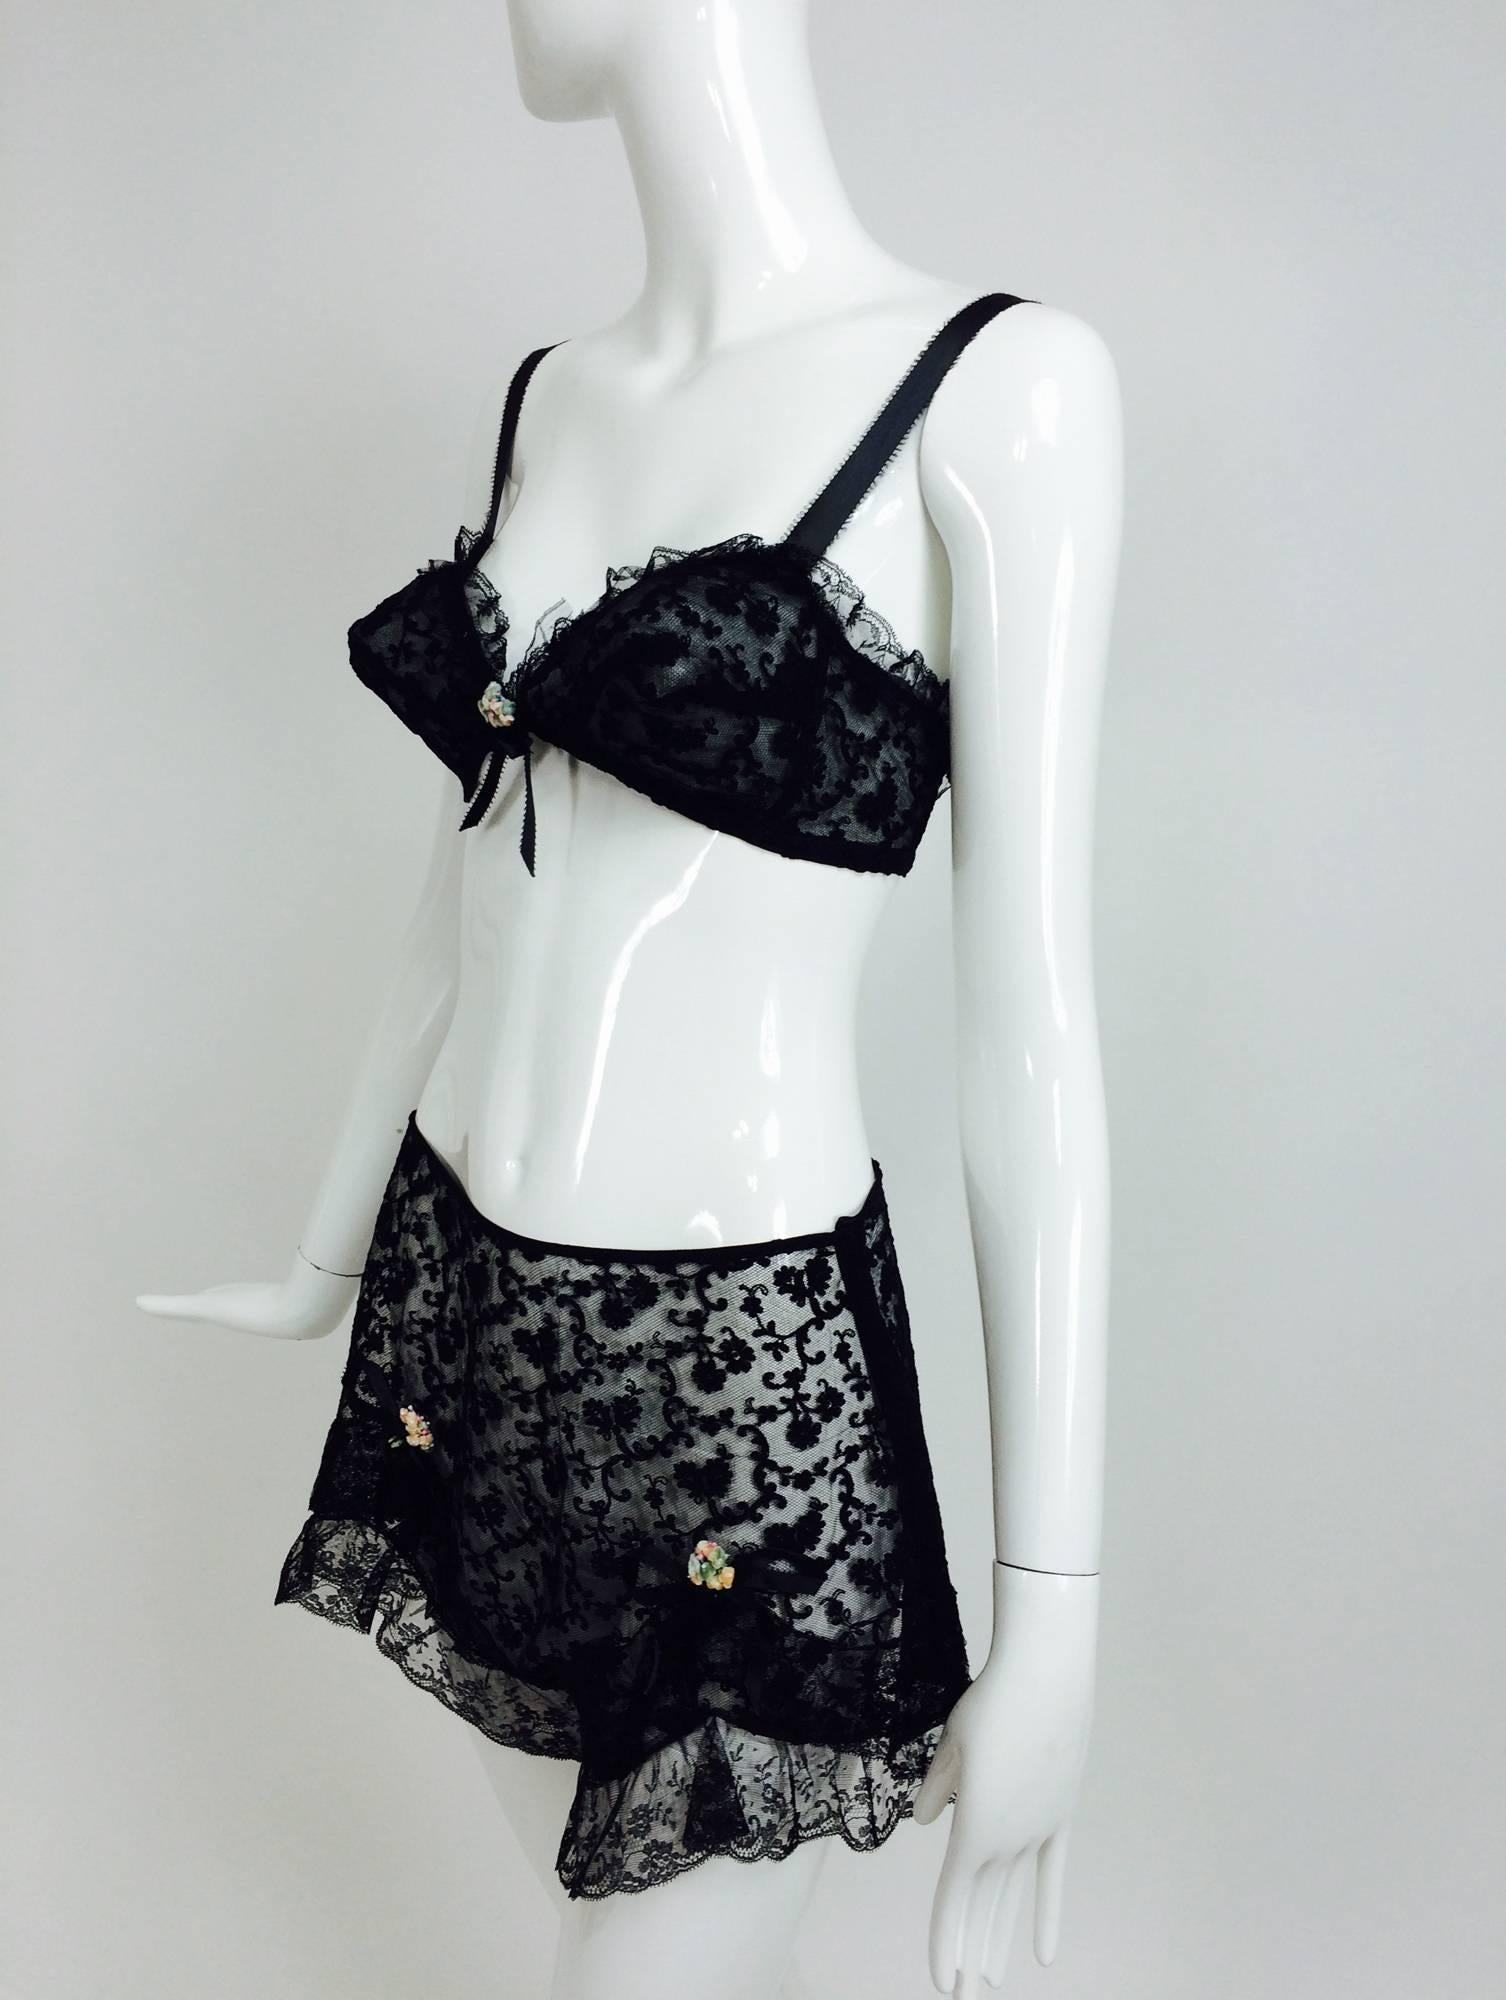 1940s pin up black lace bra & panties unworn labeled Joan's Specialty...This sweet sexy set was obtained from the original owner a number of years ago...She told me her husband gifted it to her when he returned from the war and that she thought it